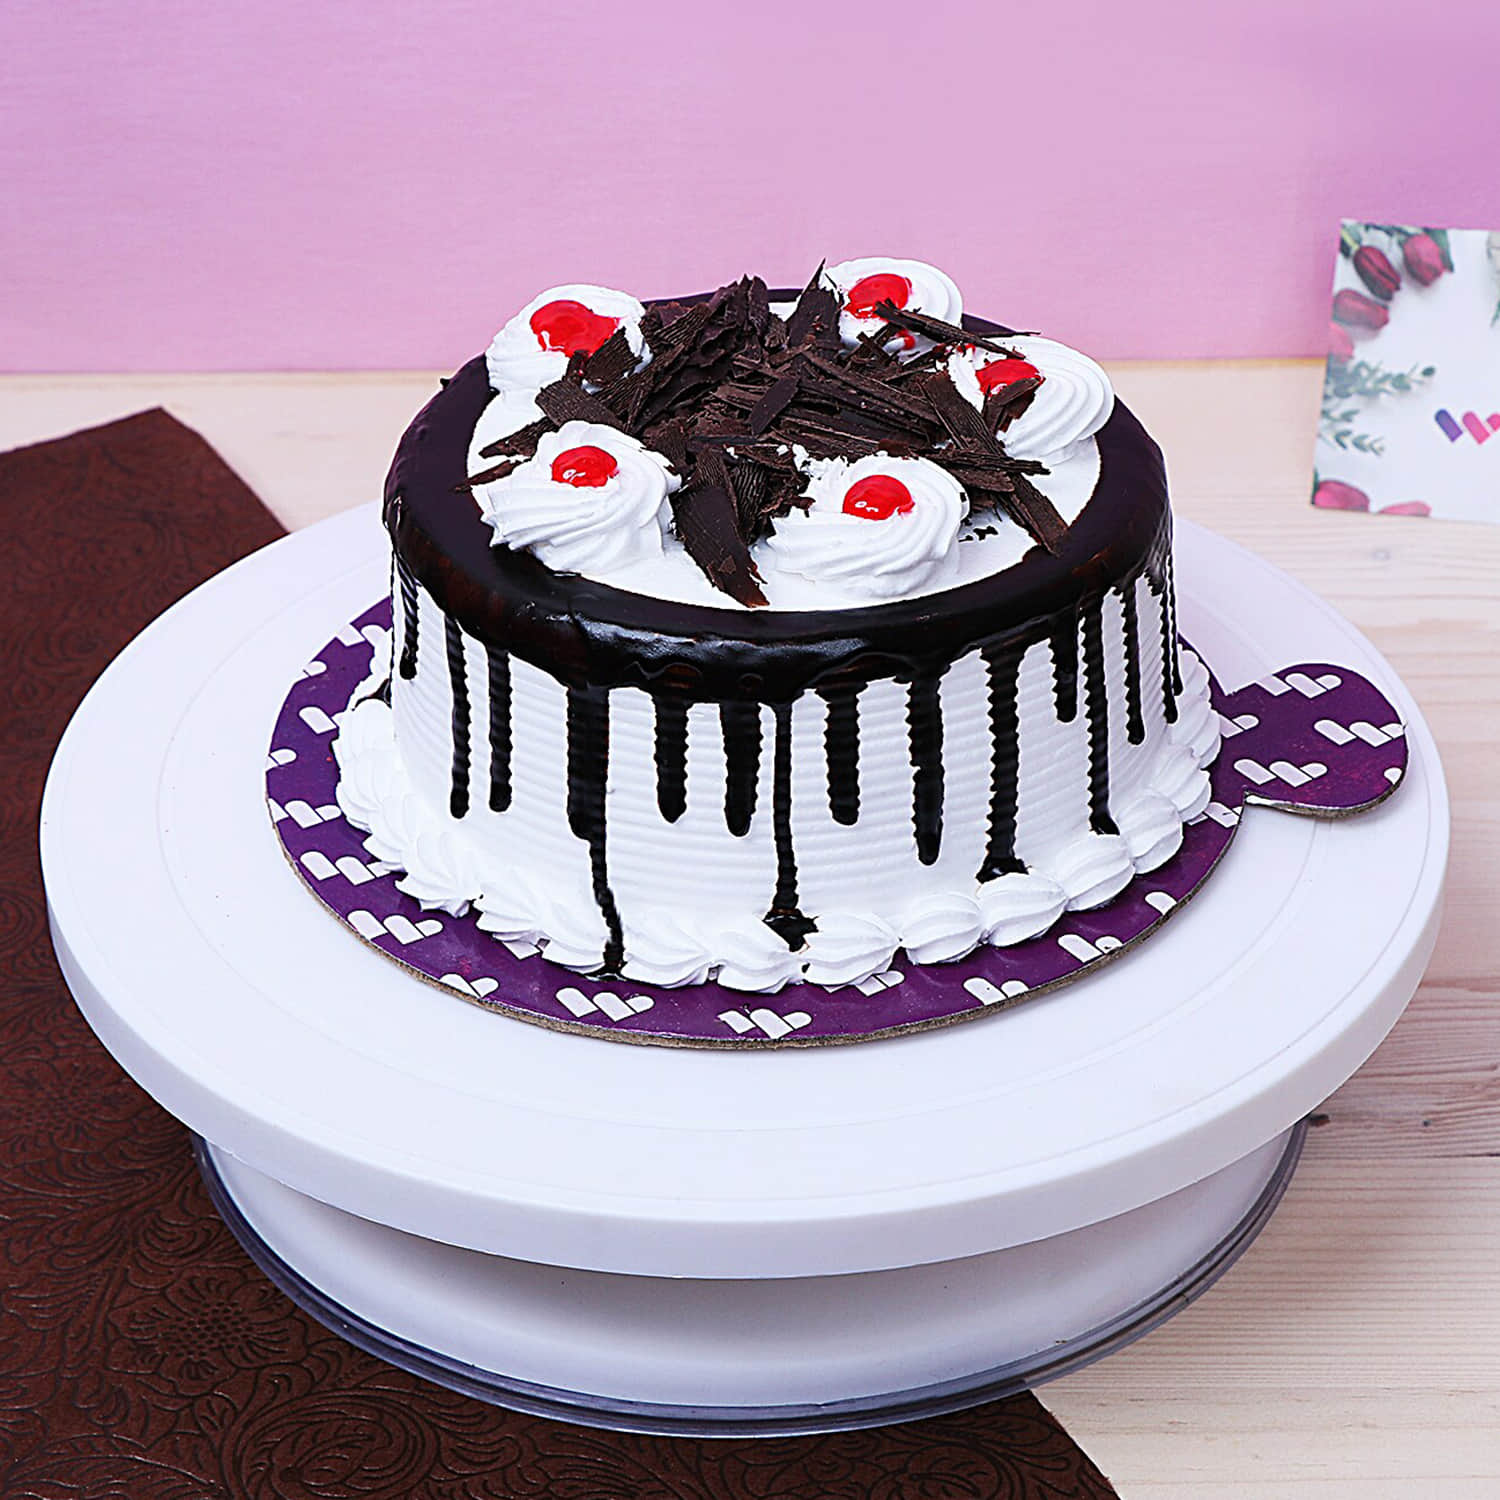 Homemade Black Forest Cake Recipe - Buttery Sweet